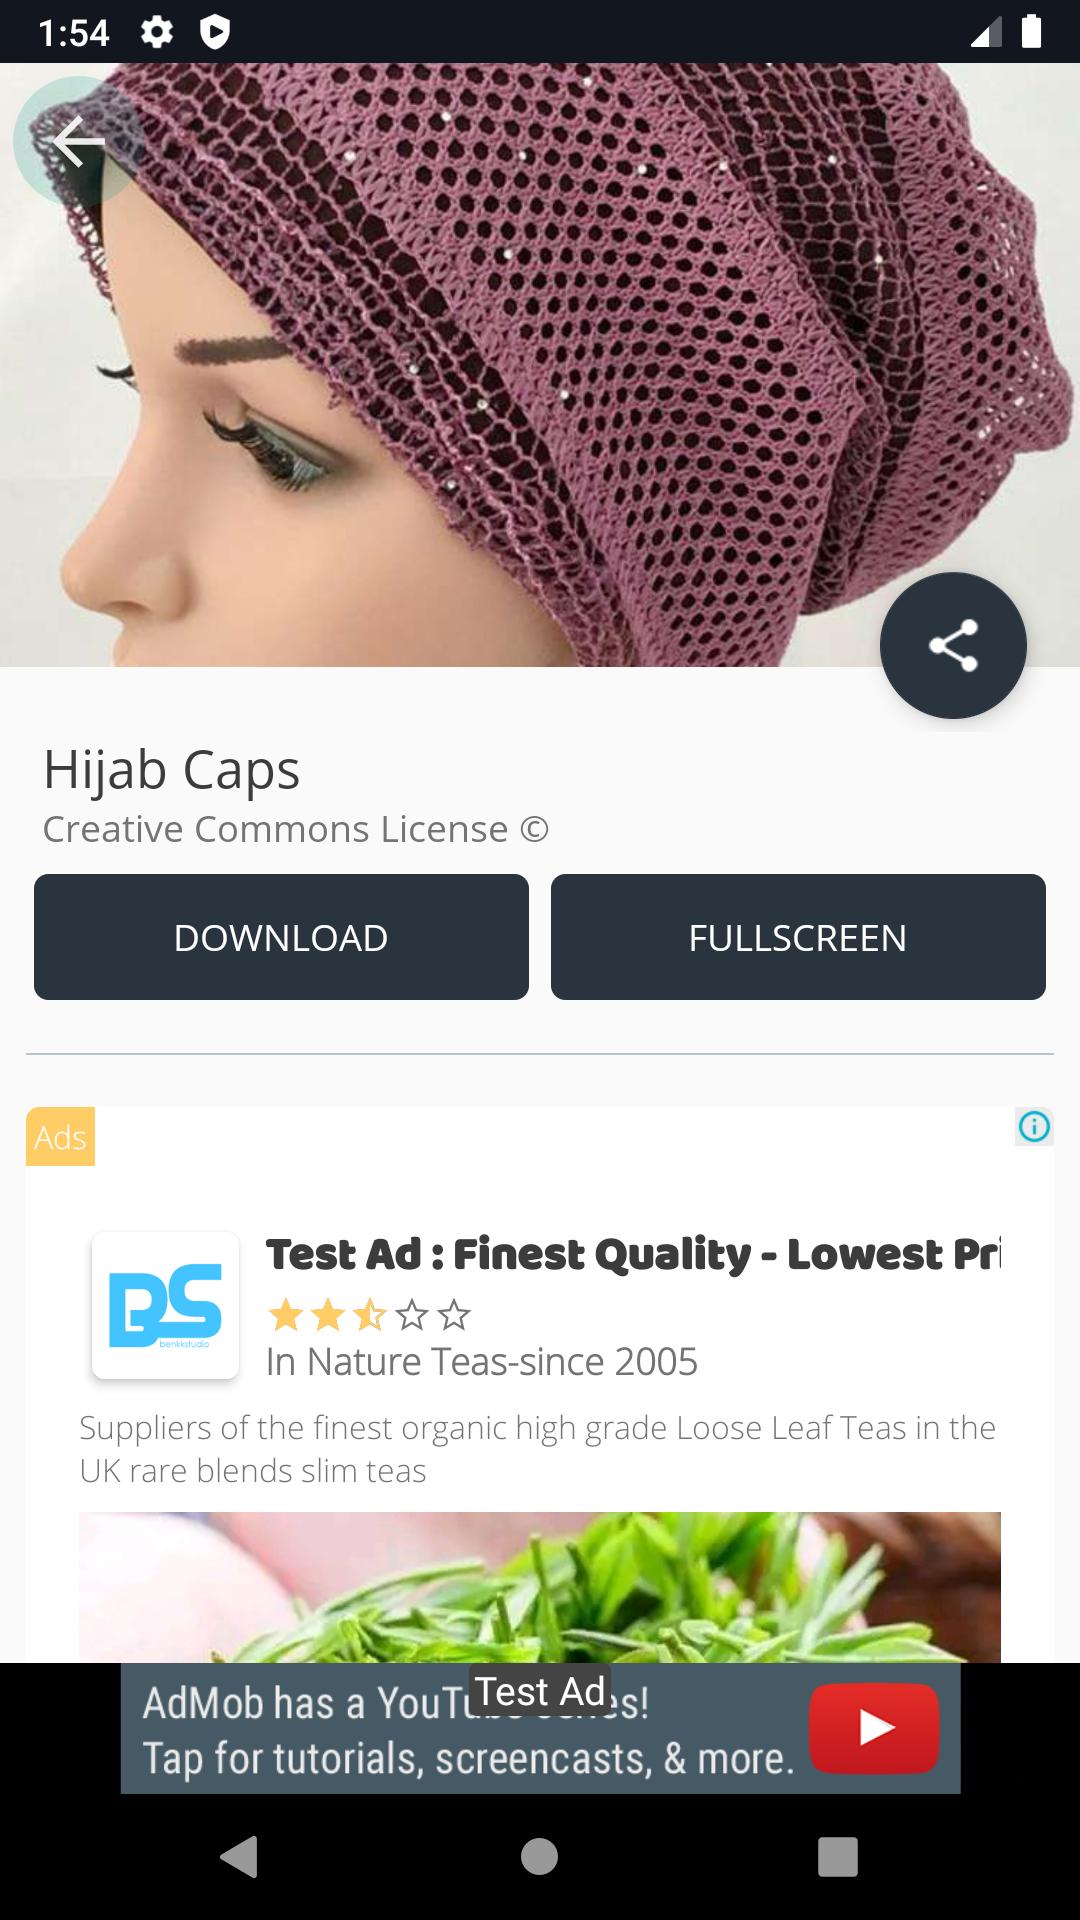 Hijab Caps for Android - APK Download